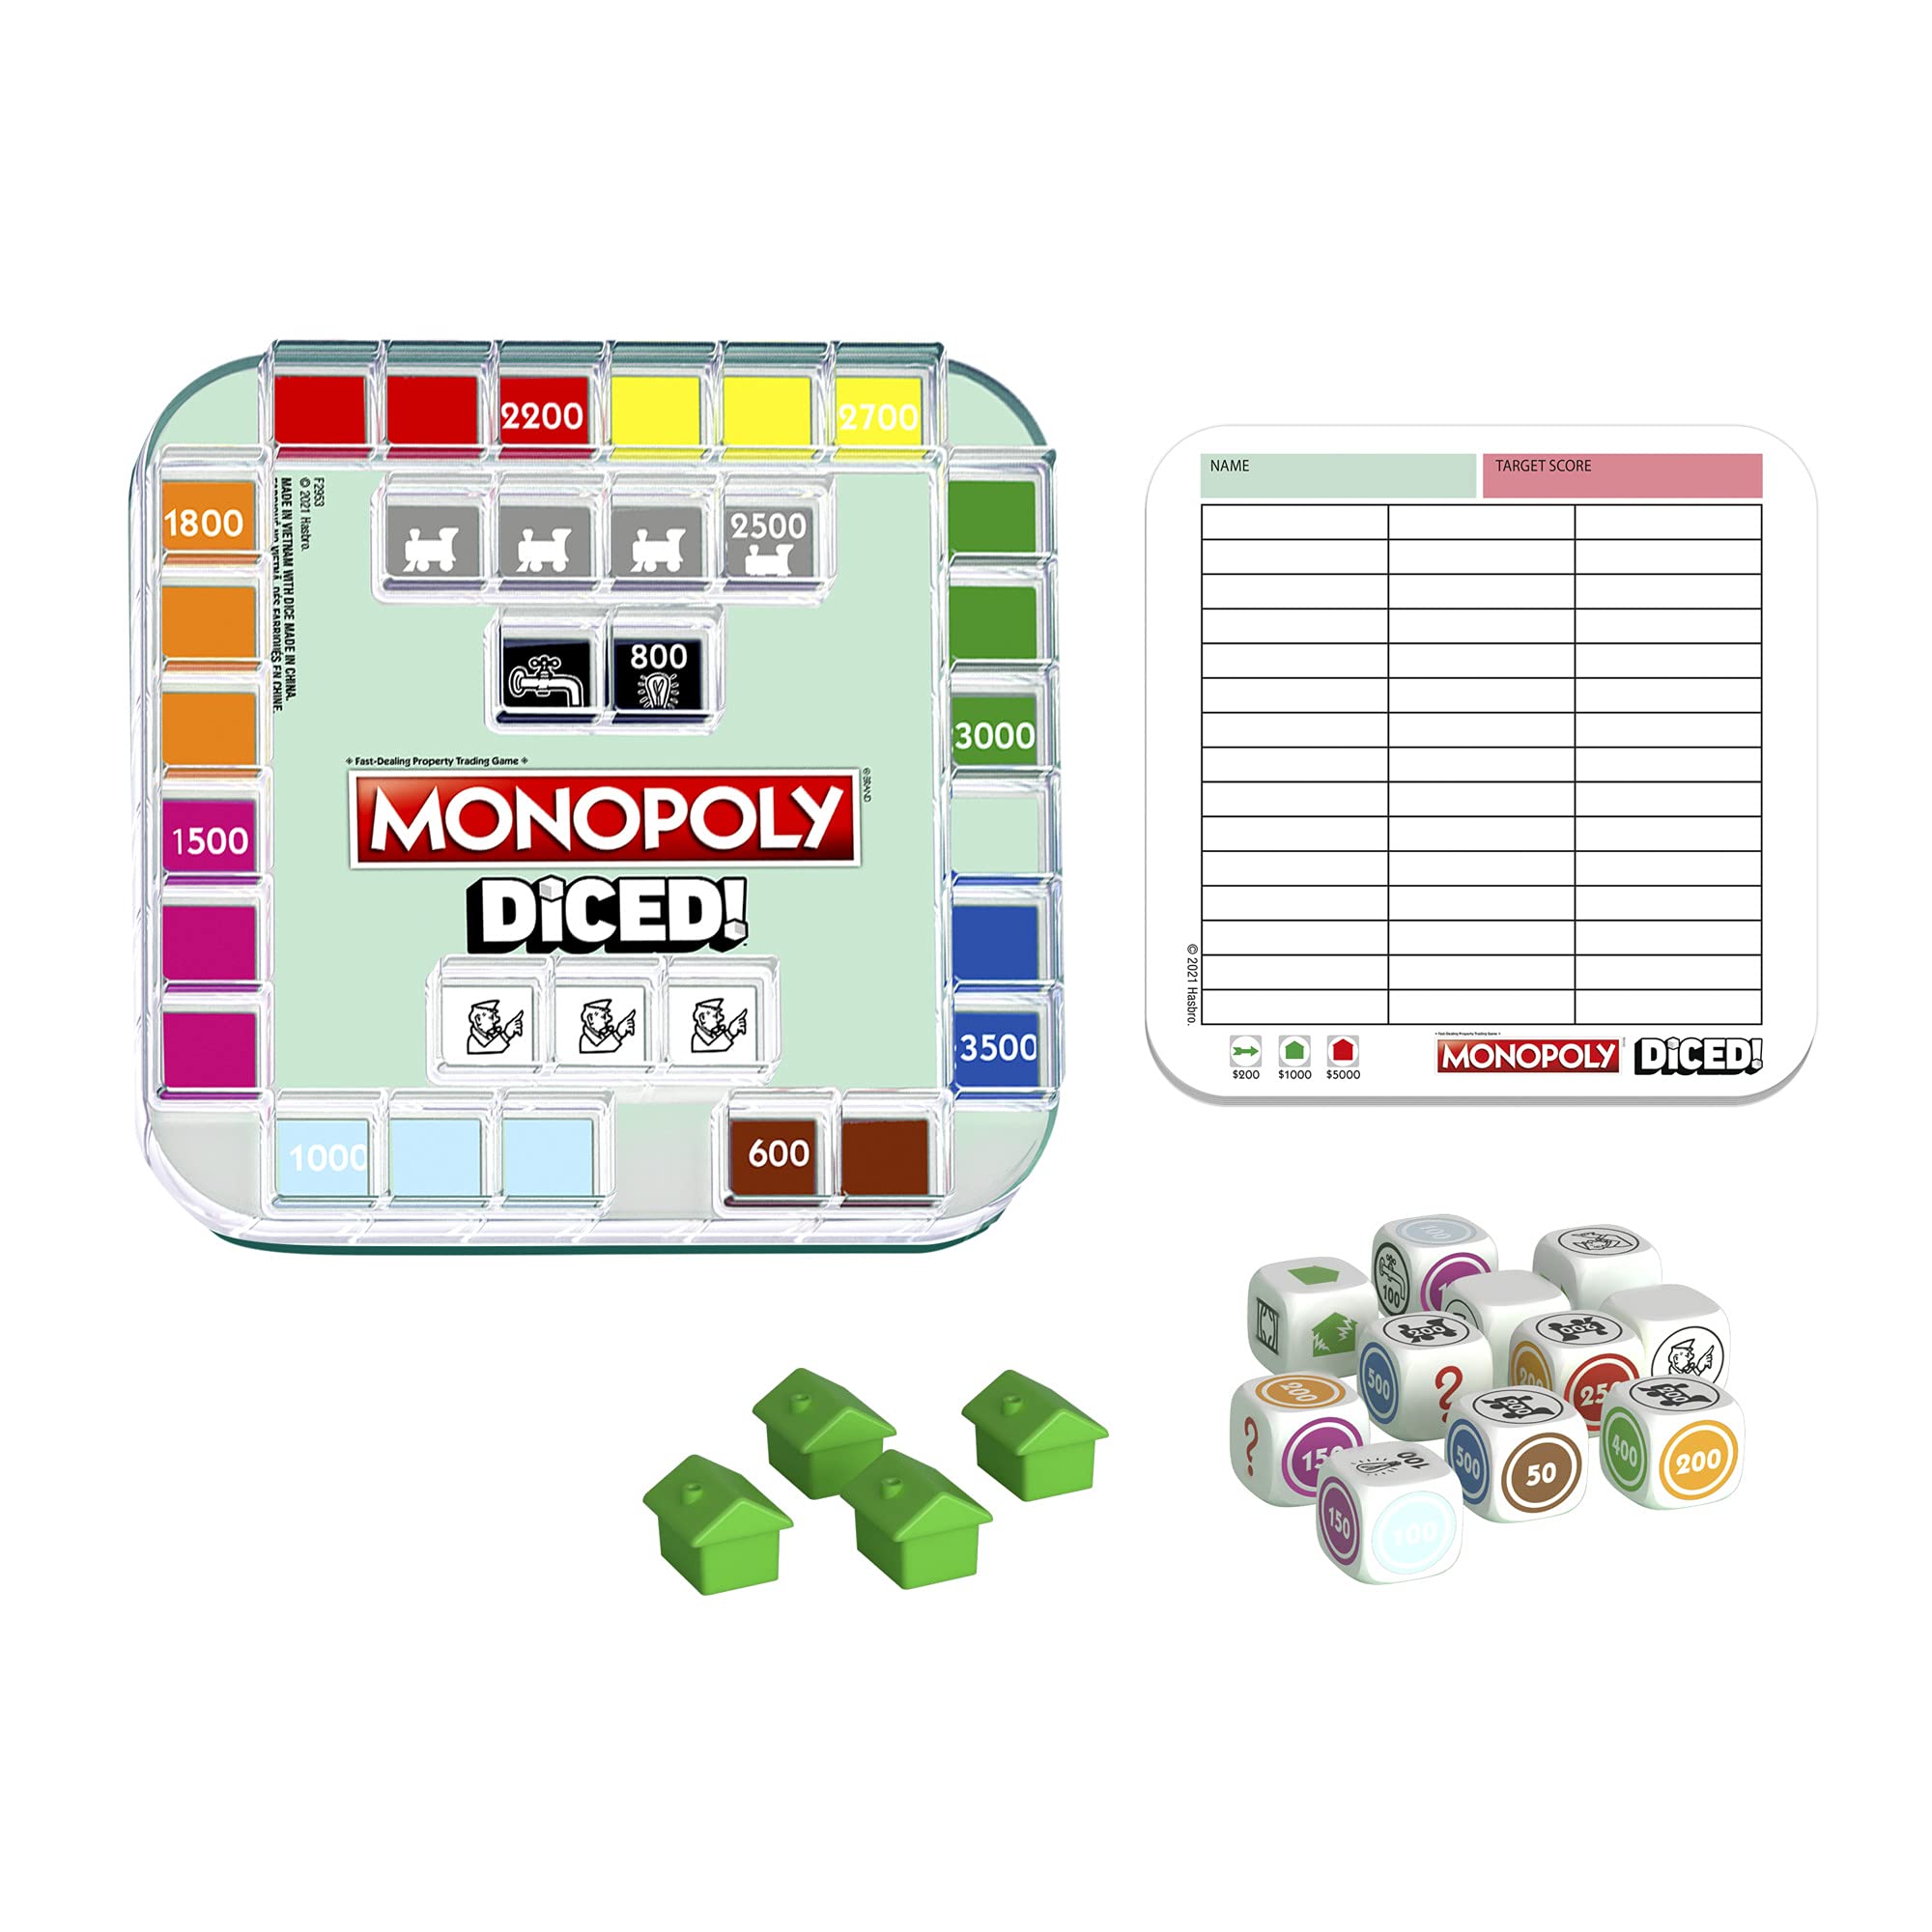 MONOPOLY Diced Game, Easy to Learn Game, Quick Game, Portable Travel Board Game, Fast Game for Kids Ages 8 and Up